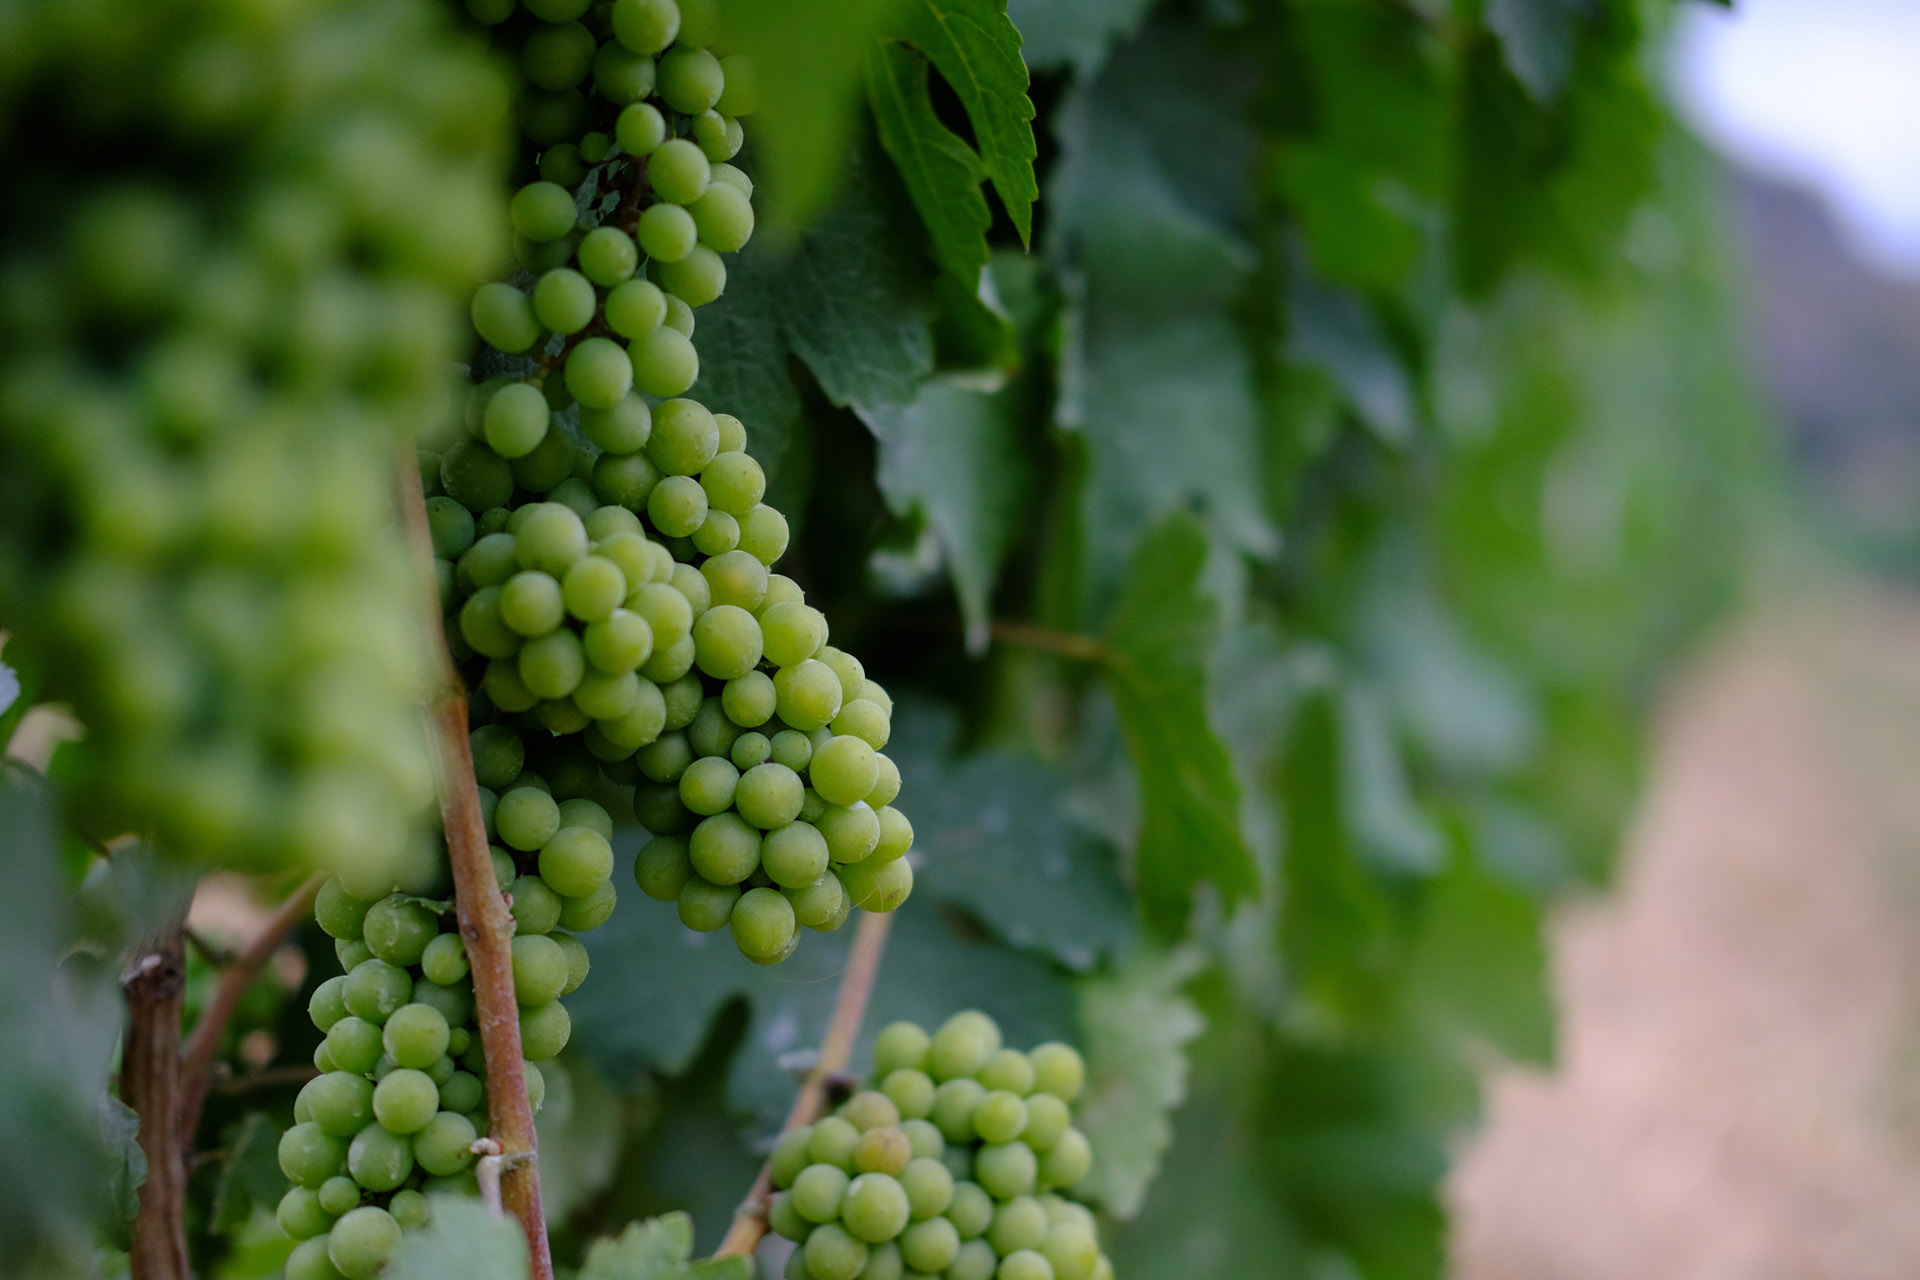 thick green grape clusters in a vineyard